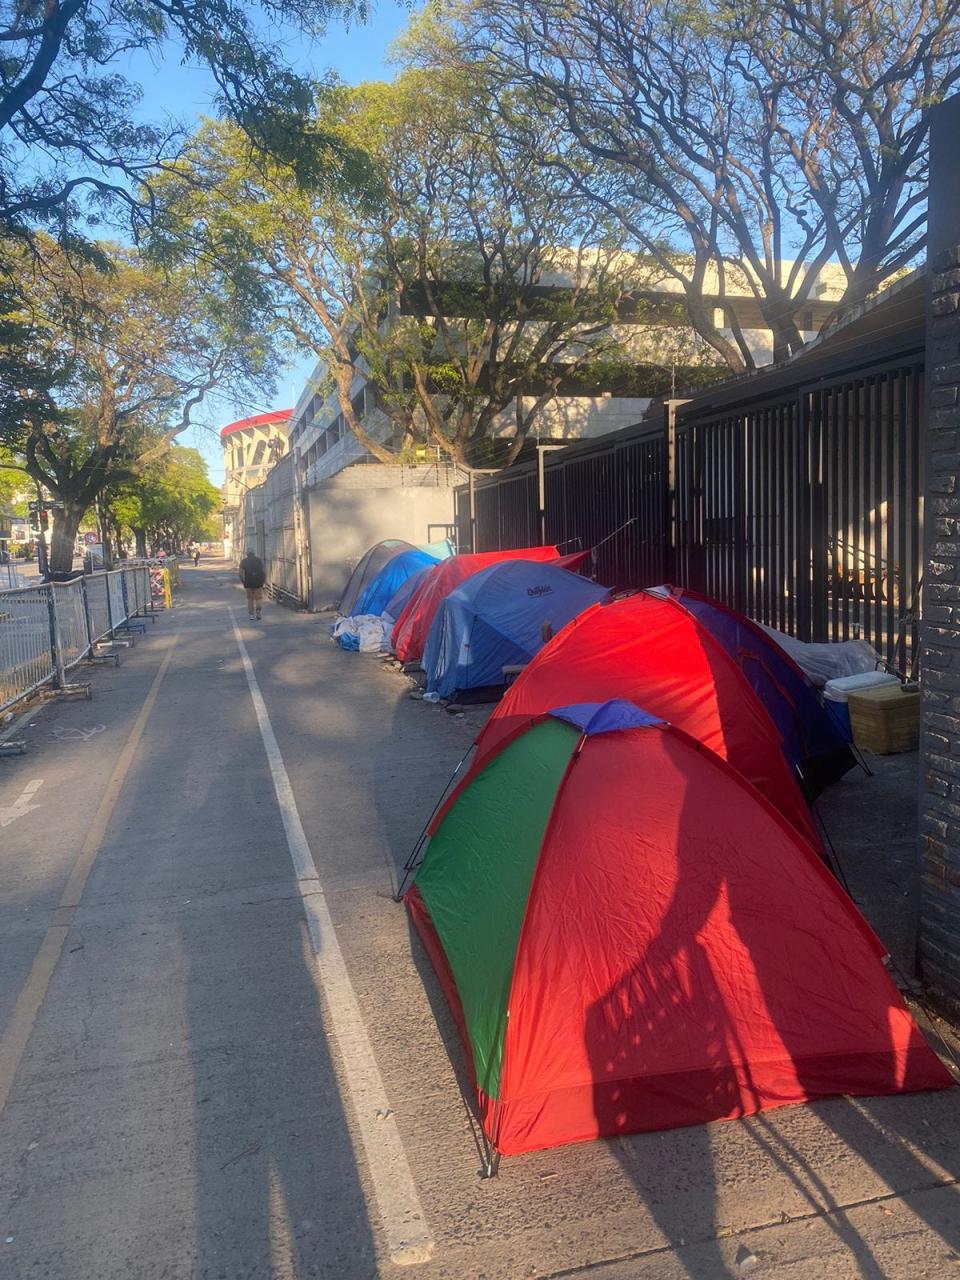 Fans with floor seating for Taylor Swift's Eras Tour concert in Buenos Aires camp out in tents to be first in line to get into the stadium.